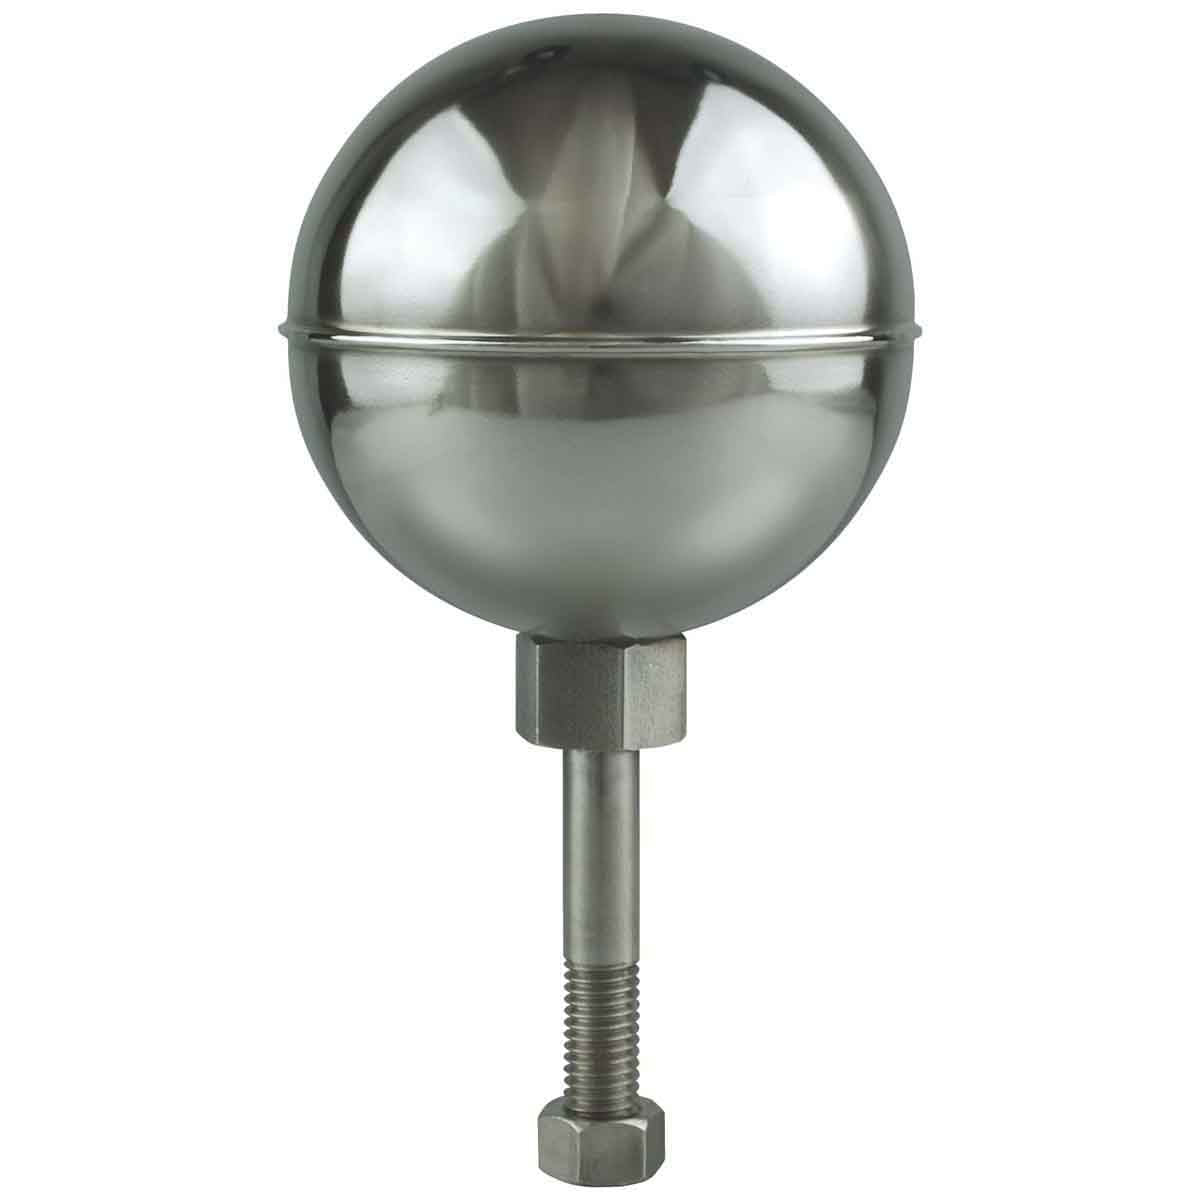 Stainless Steel Ball Ornaments